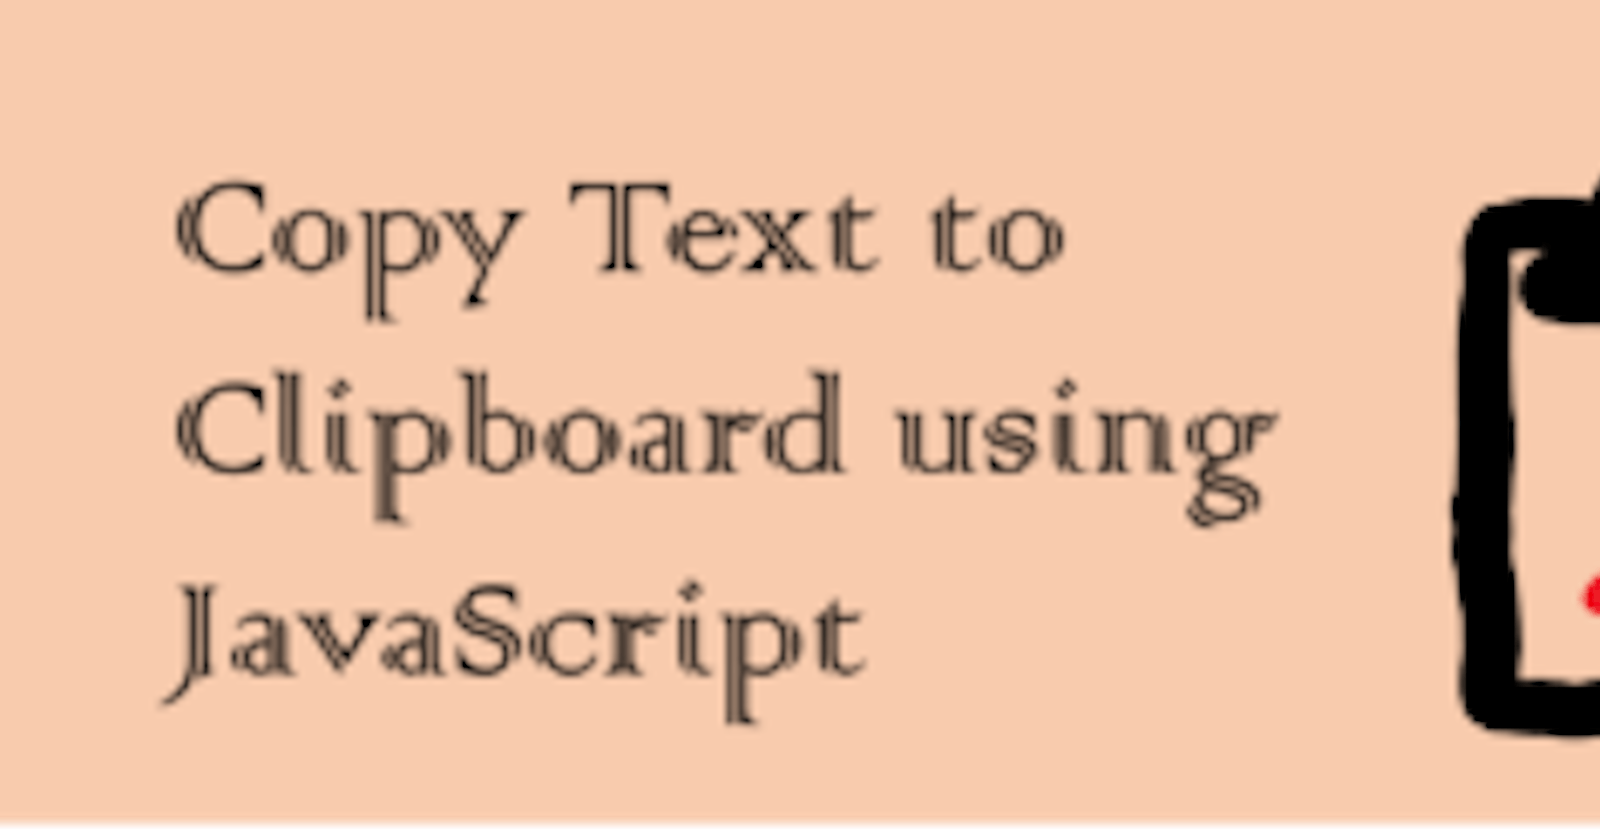 Accessing the clipboard in JavaScript